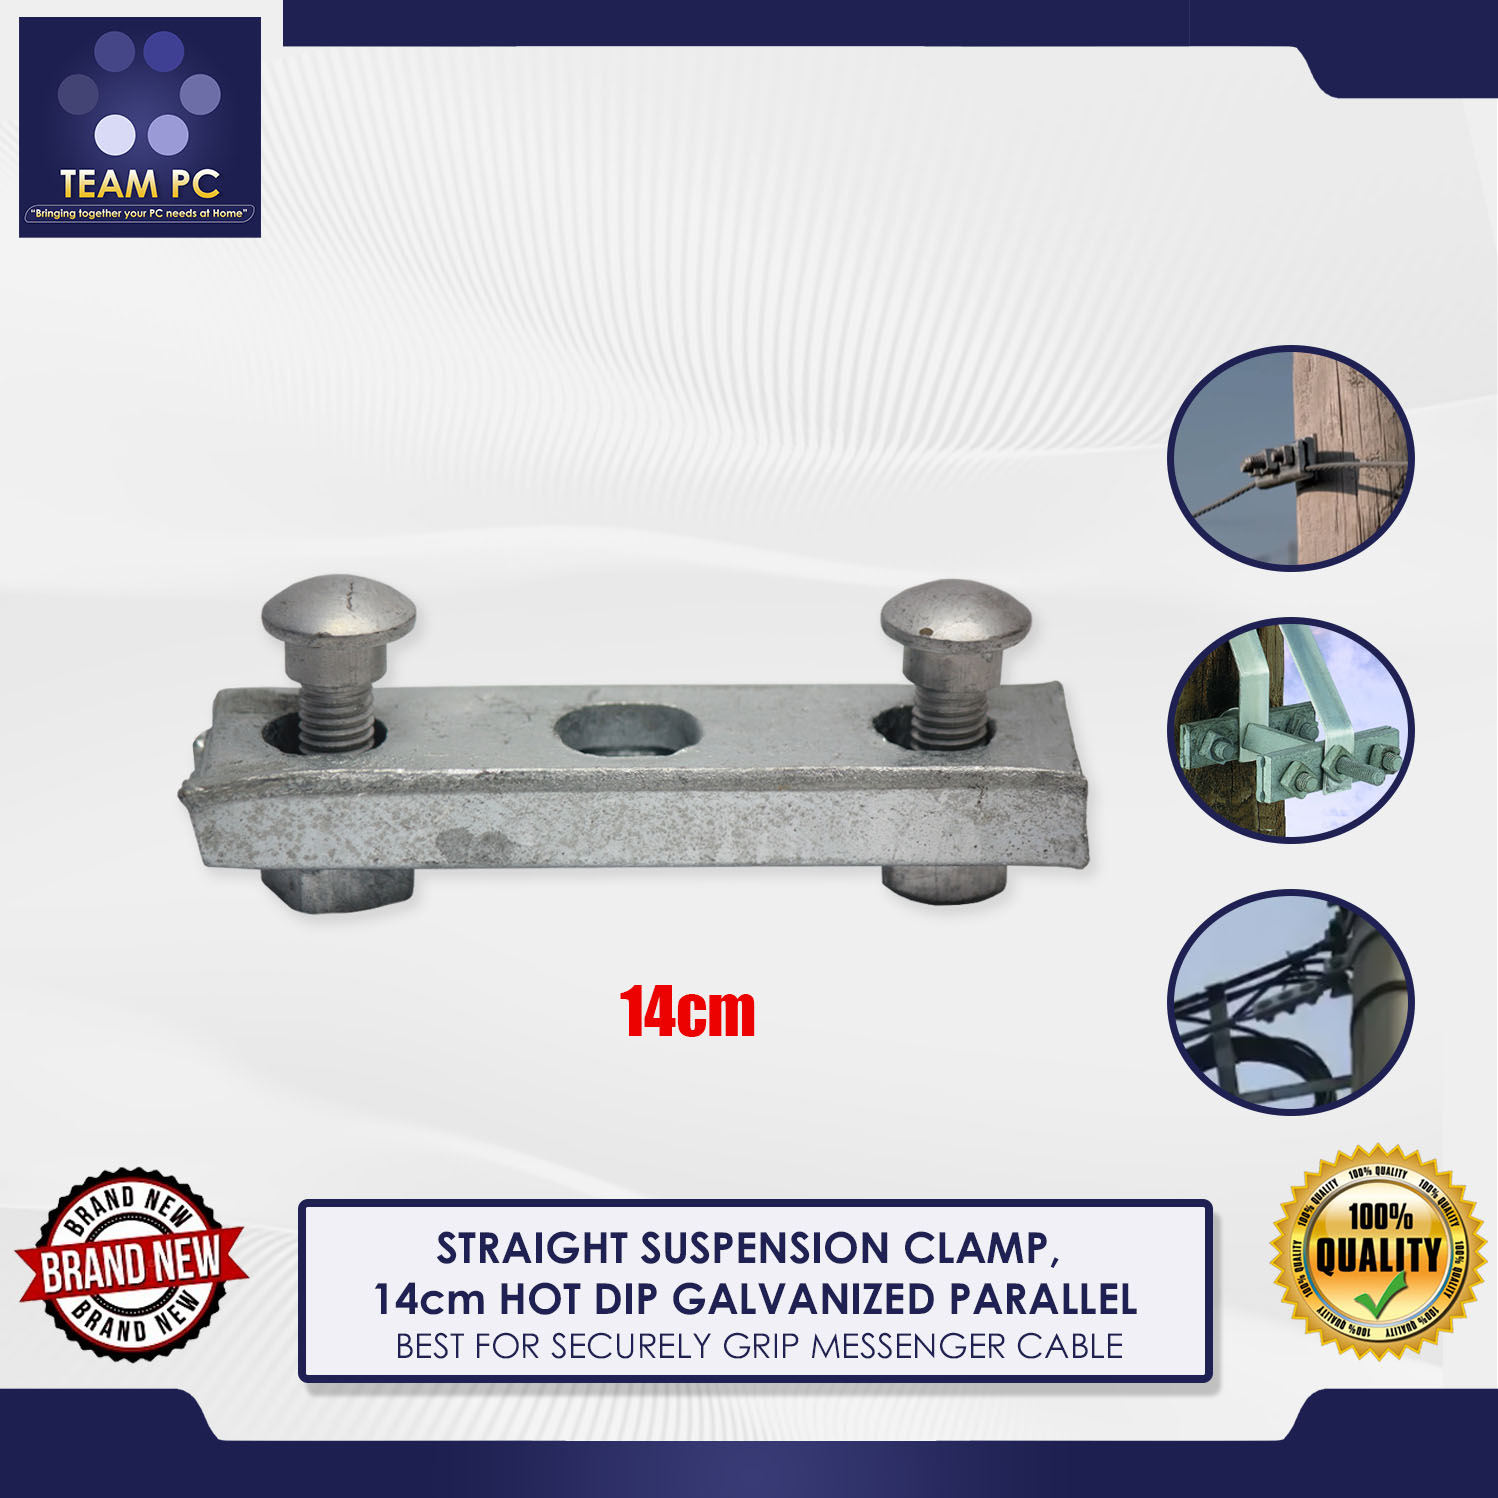 Cable Suspension Clamp, 1, 2, 3 Bolts Messenger Suspension Clamp